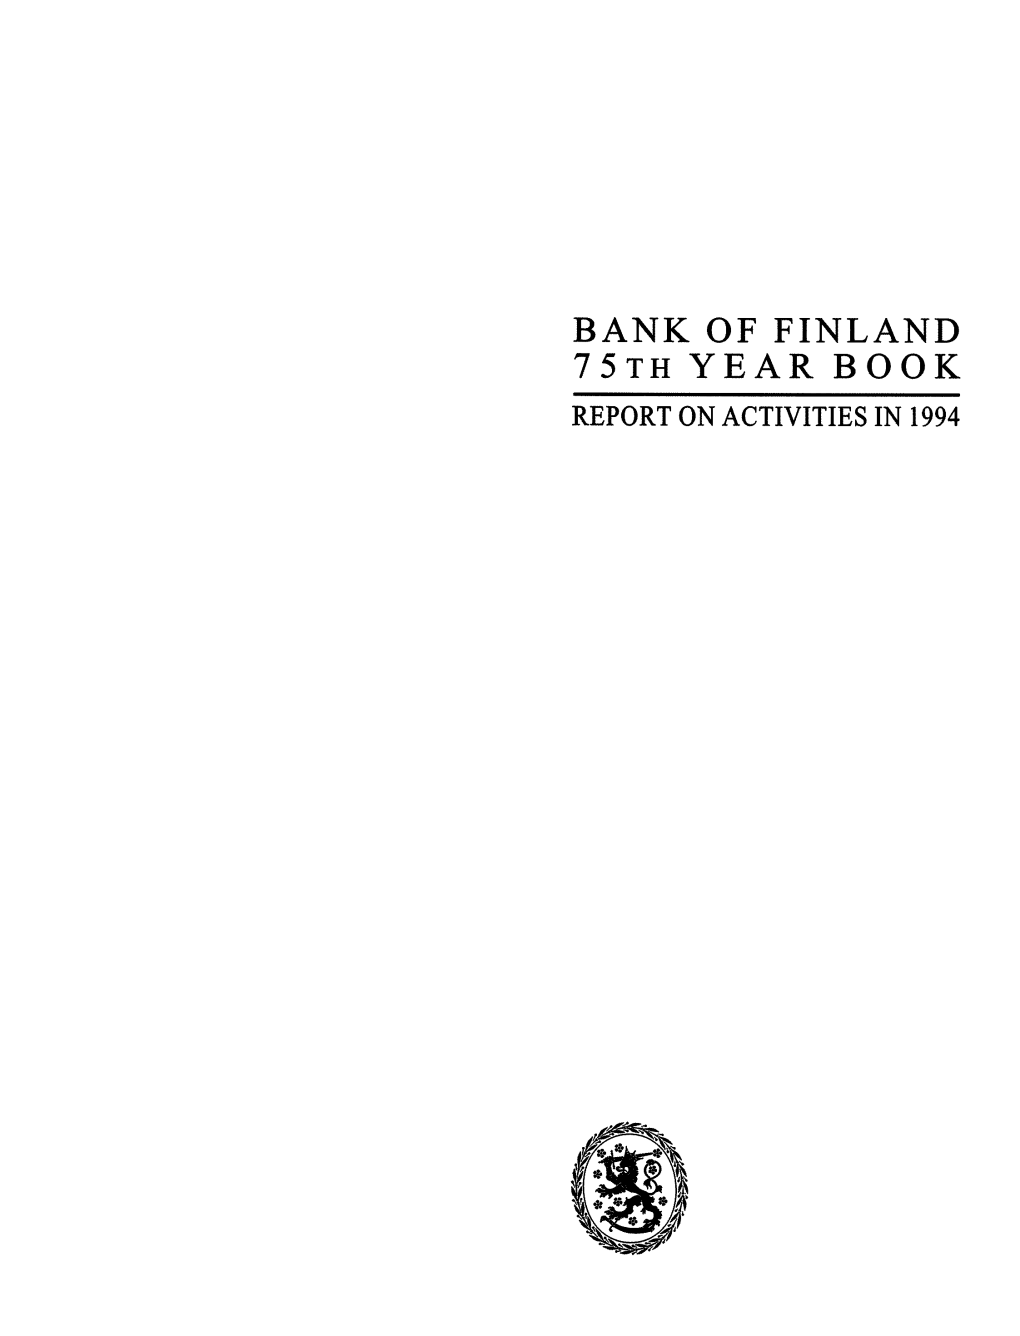 BANK of FINLAND 75TH YEAR BOOK REPORT on ACTIVITIES in 1994 the Figures in the Year Book Are Based on Data Available in the Middle of February 1995